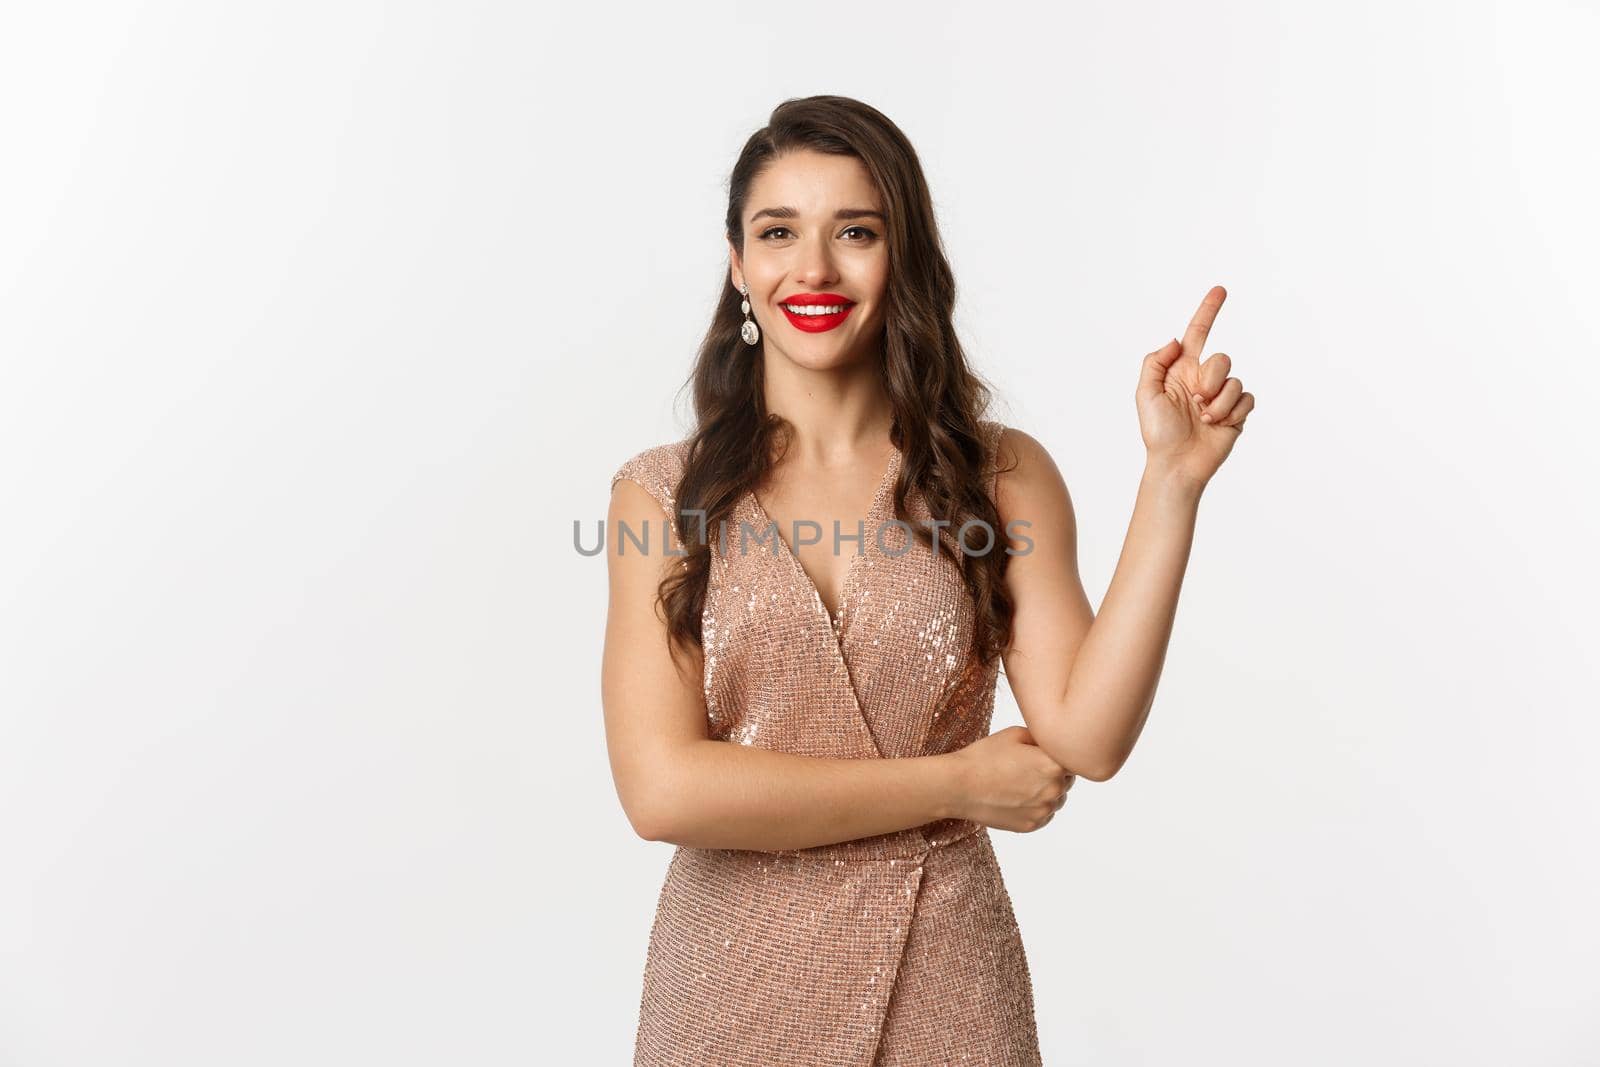 Beautiful woman in elegant dress on christmas party, pointing finger right at logo, smiling with red lips, standing over white background.